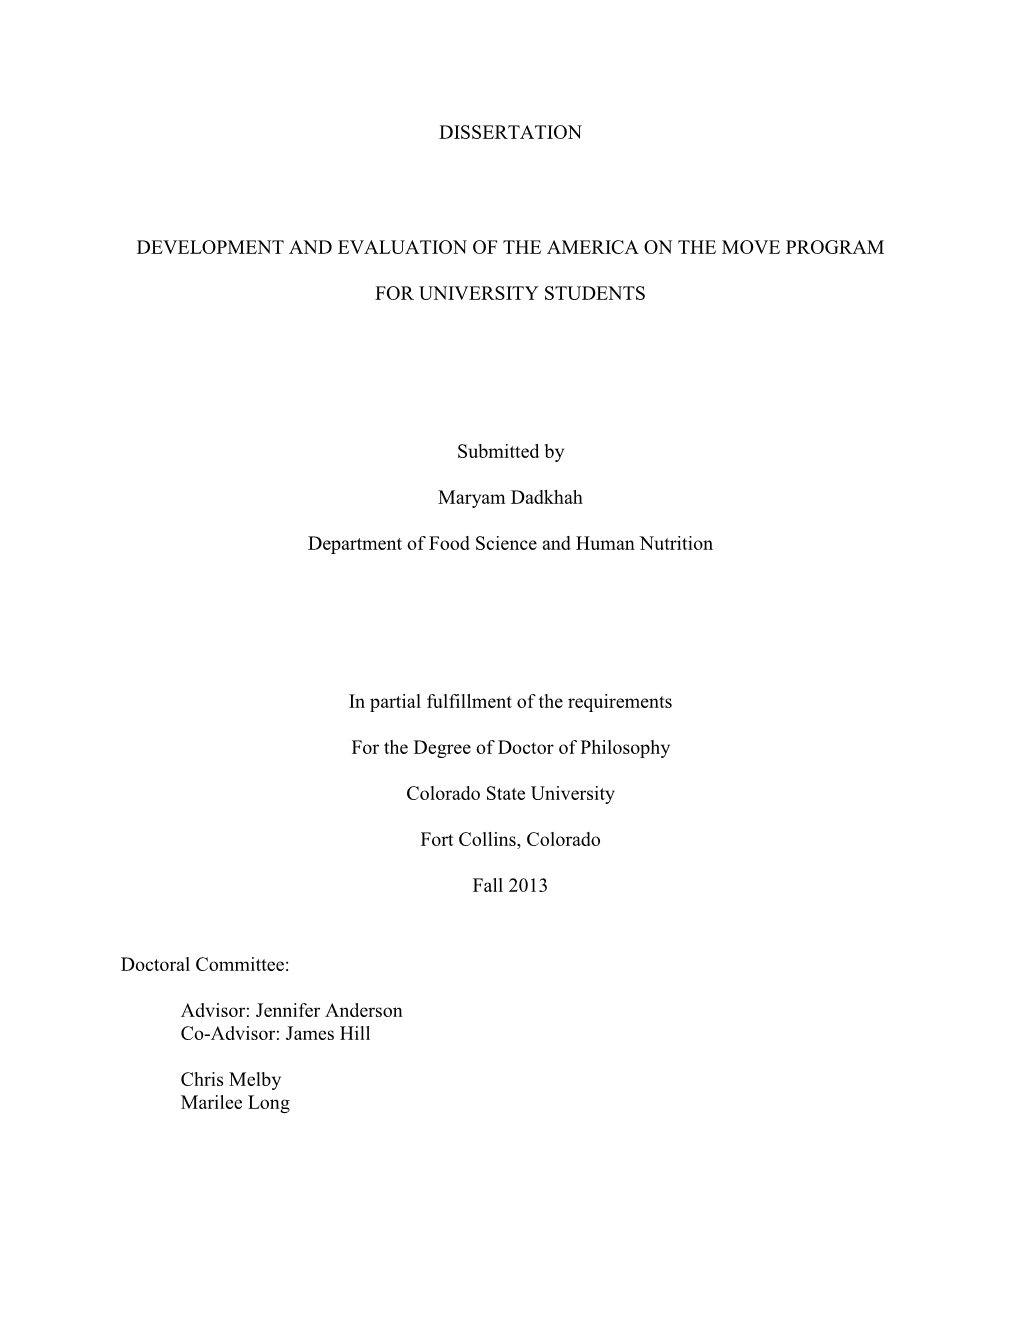 DISSERTATION DEVELOPMENT and EVALUATION of the AMERICA on the MOVE PROGRAM for UNIVERSITY STUDENTS Submitted by Maryam Dadkhah